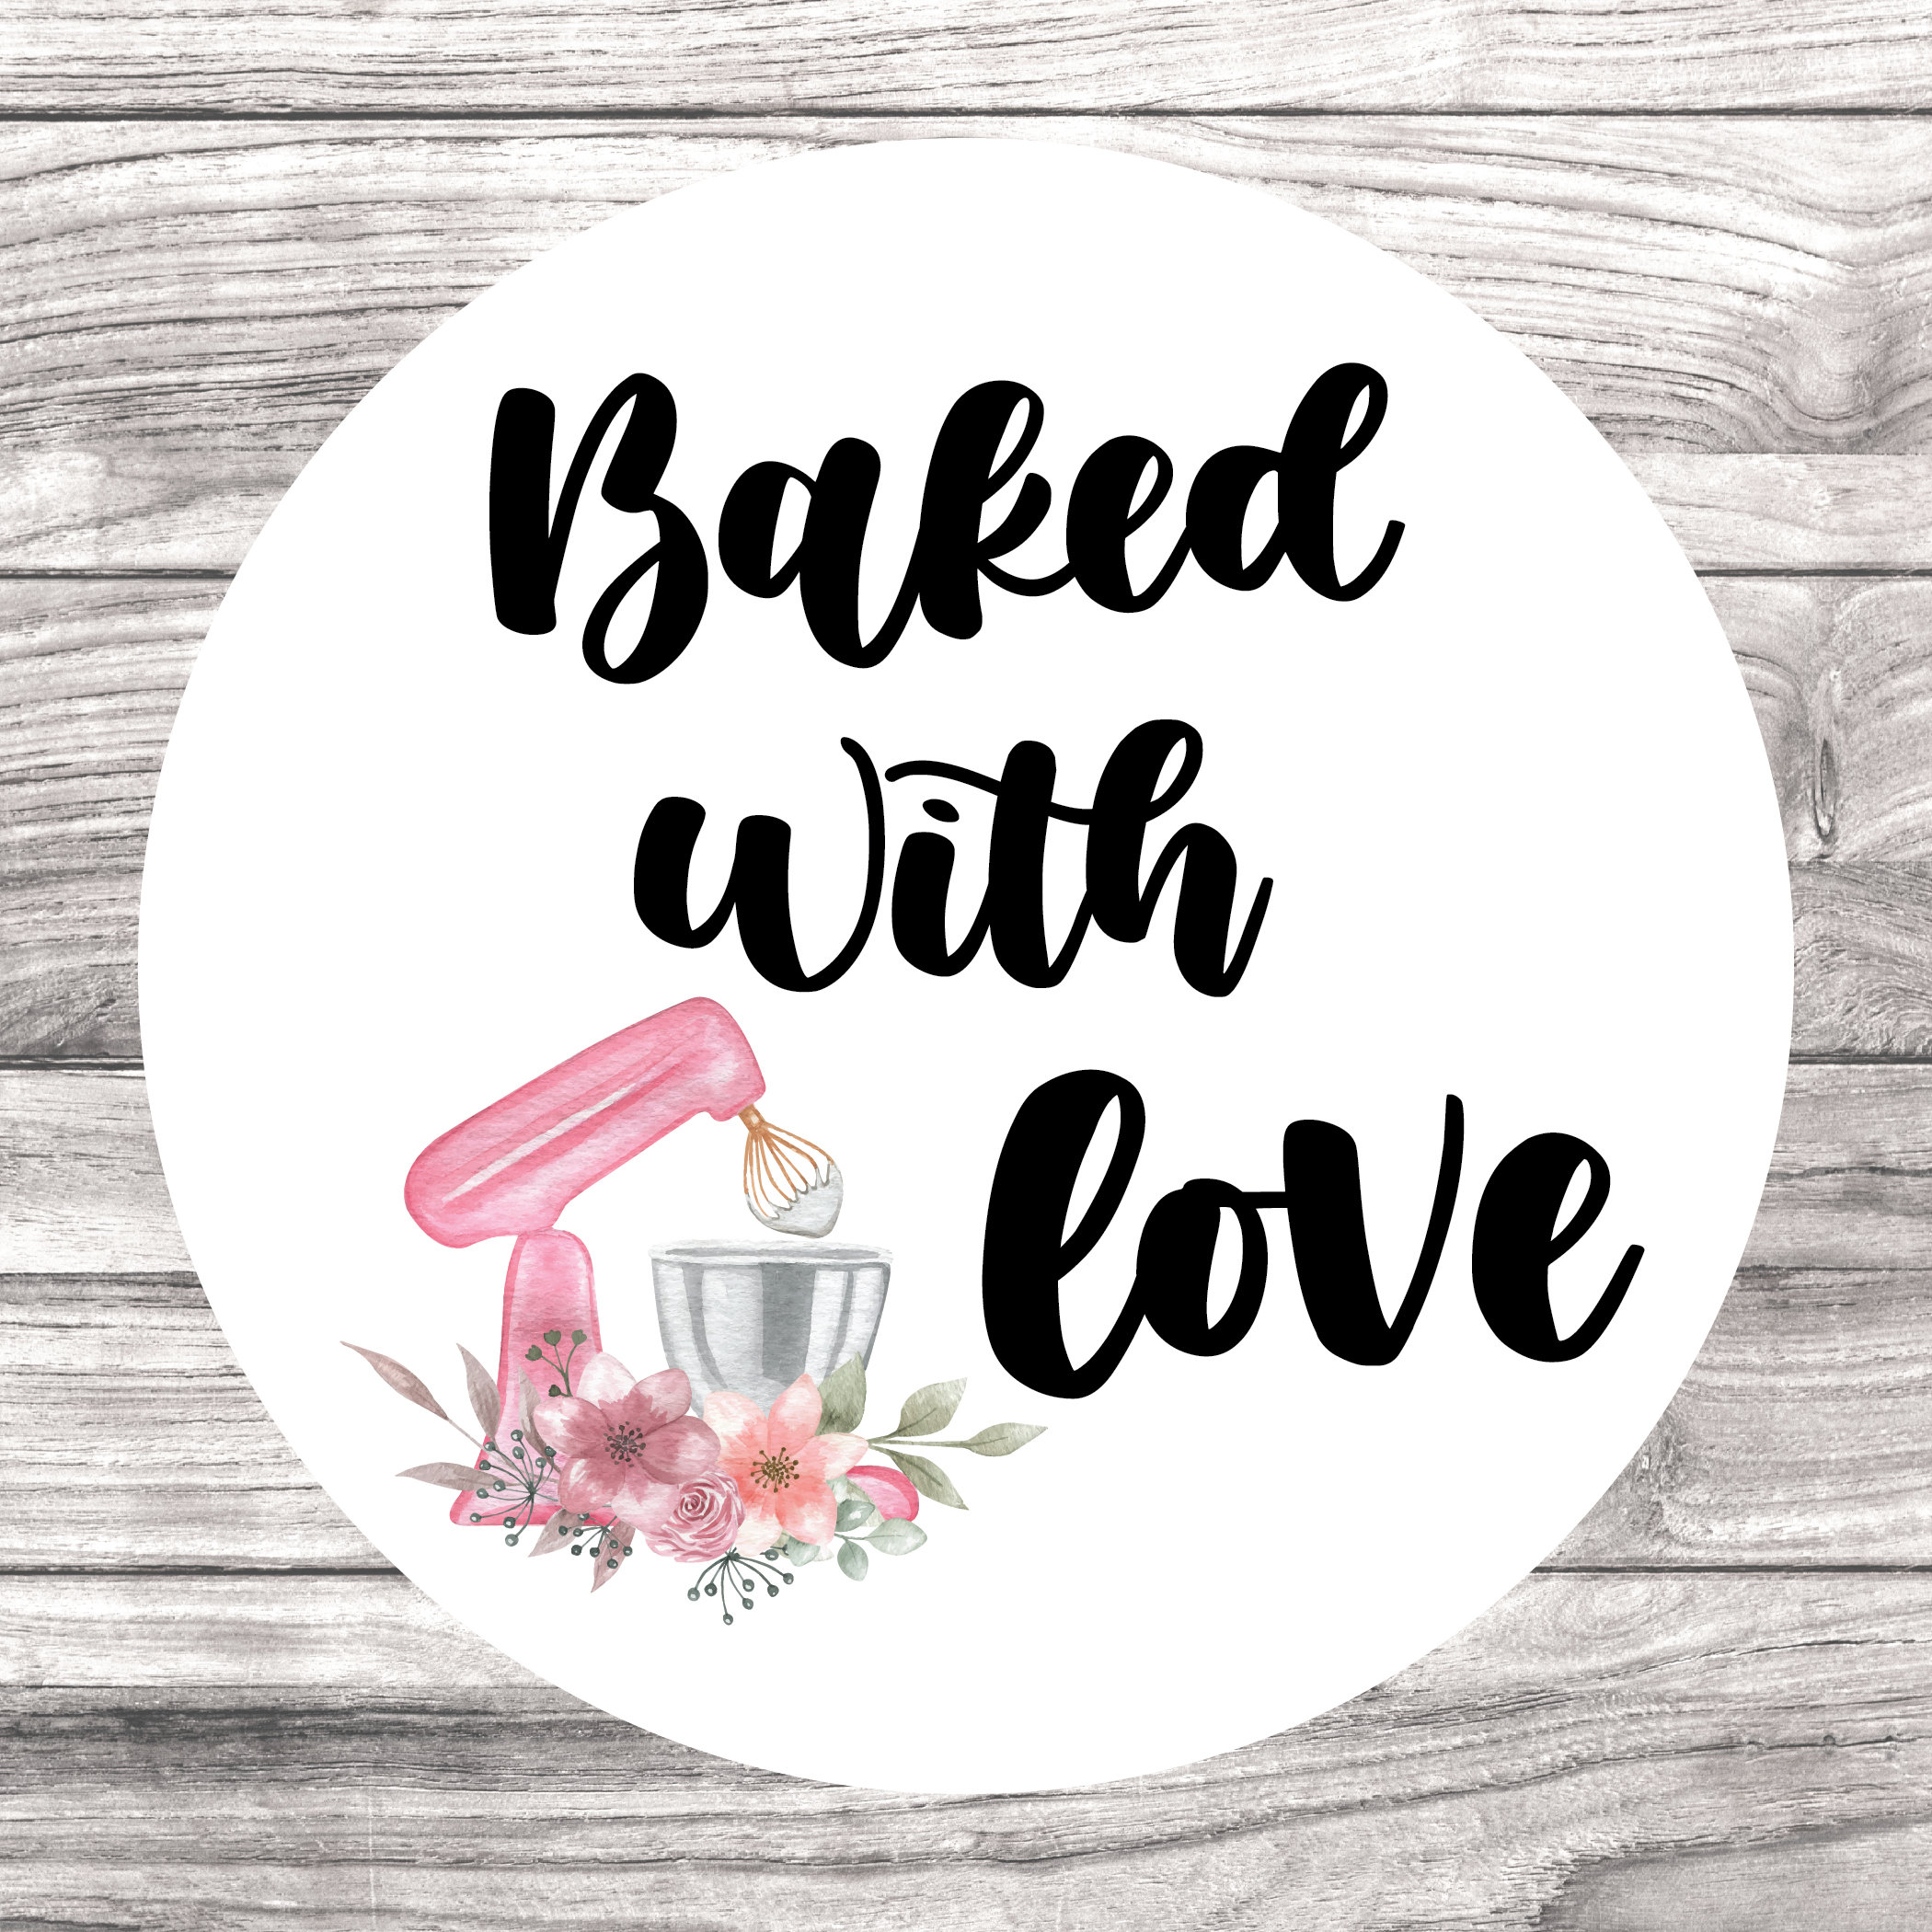 Baked With Love Stickers 12 pack